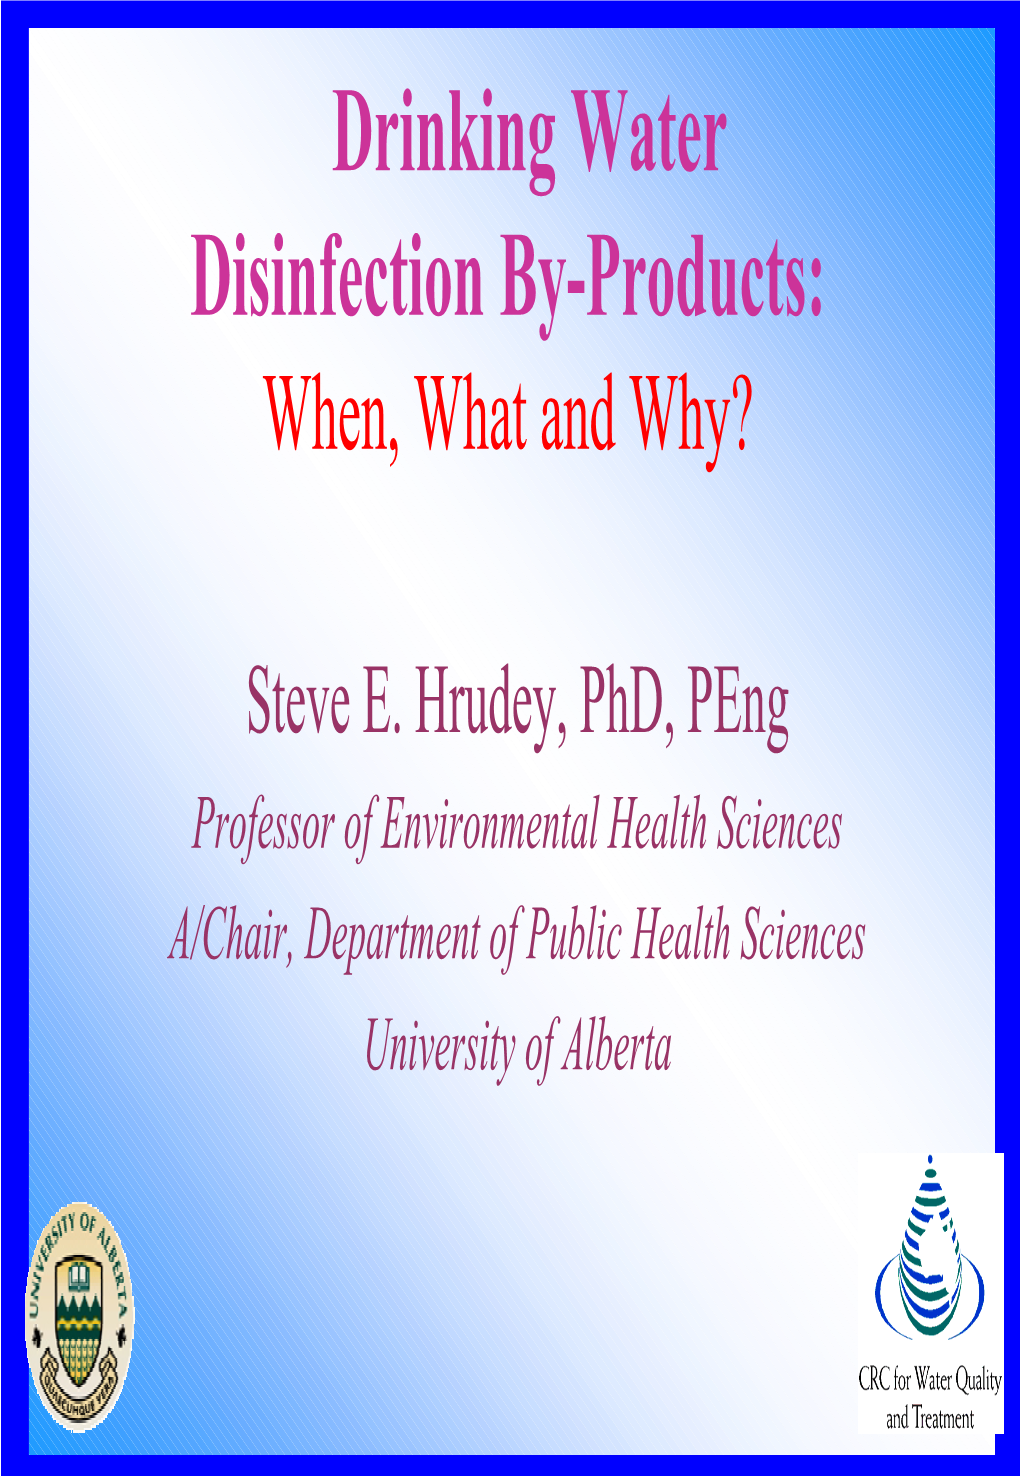 Drinking Water Disinfection By-Products: When, What and Why?